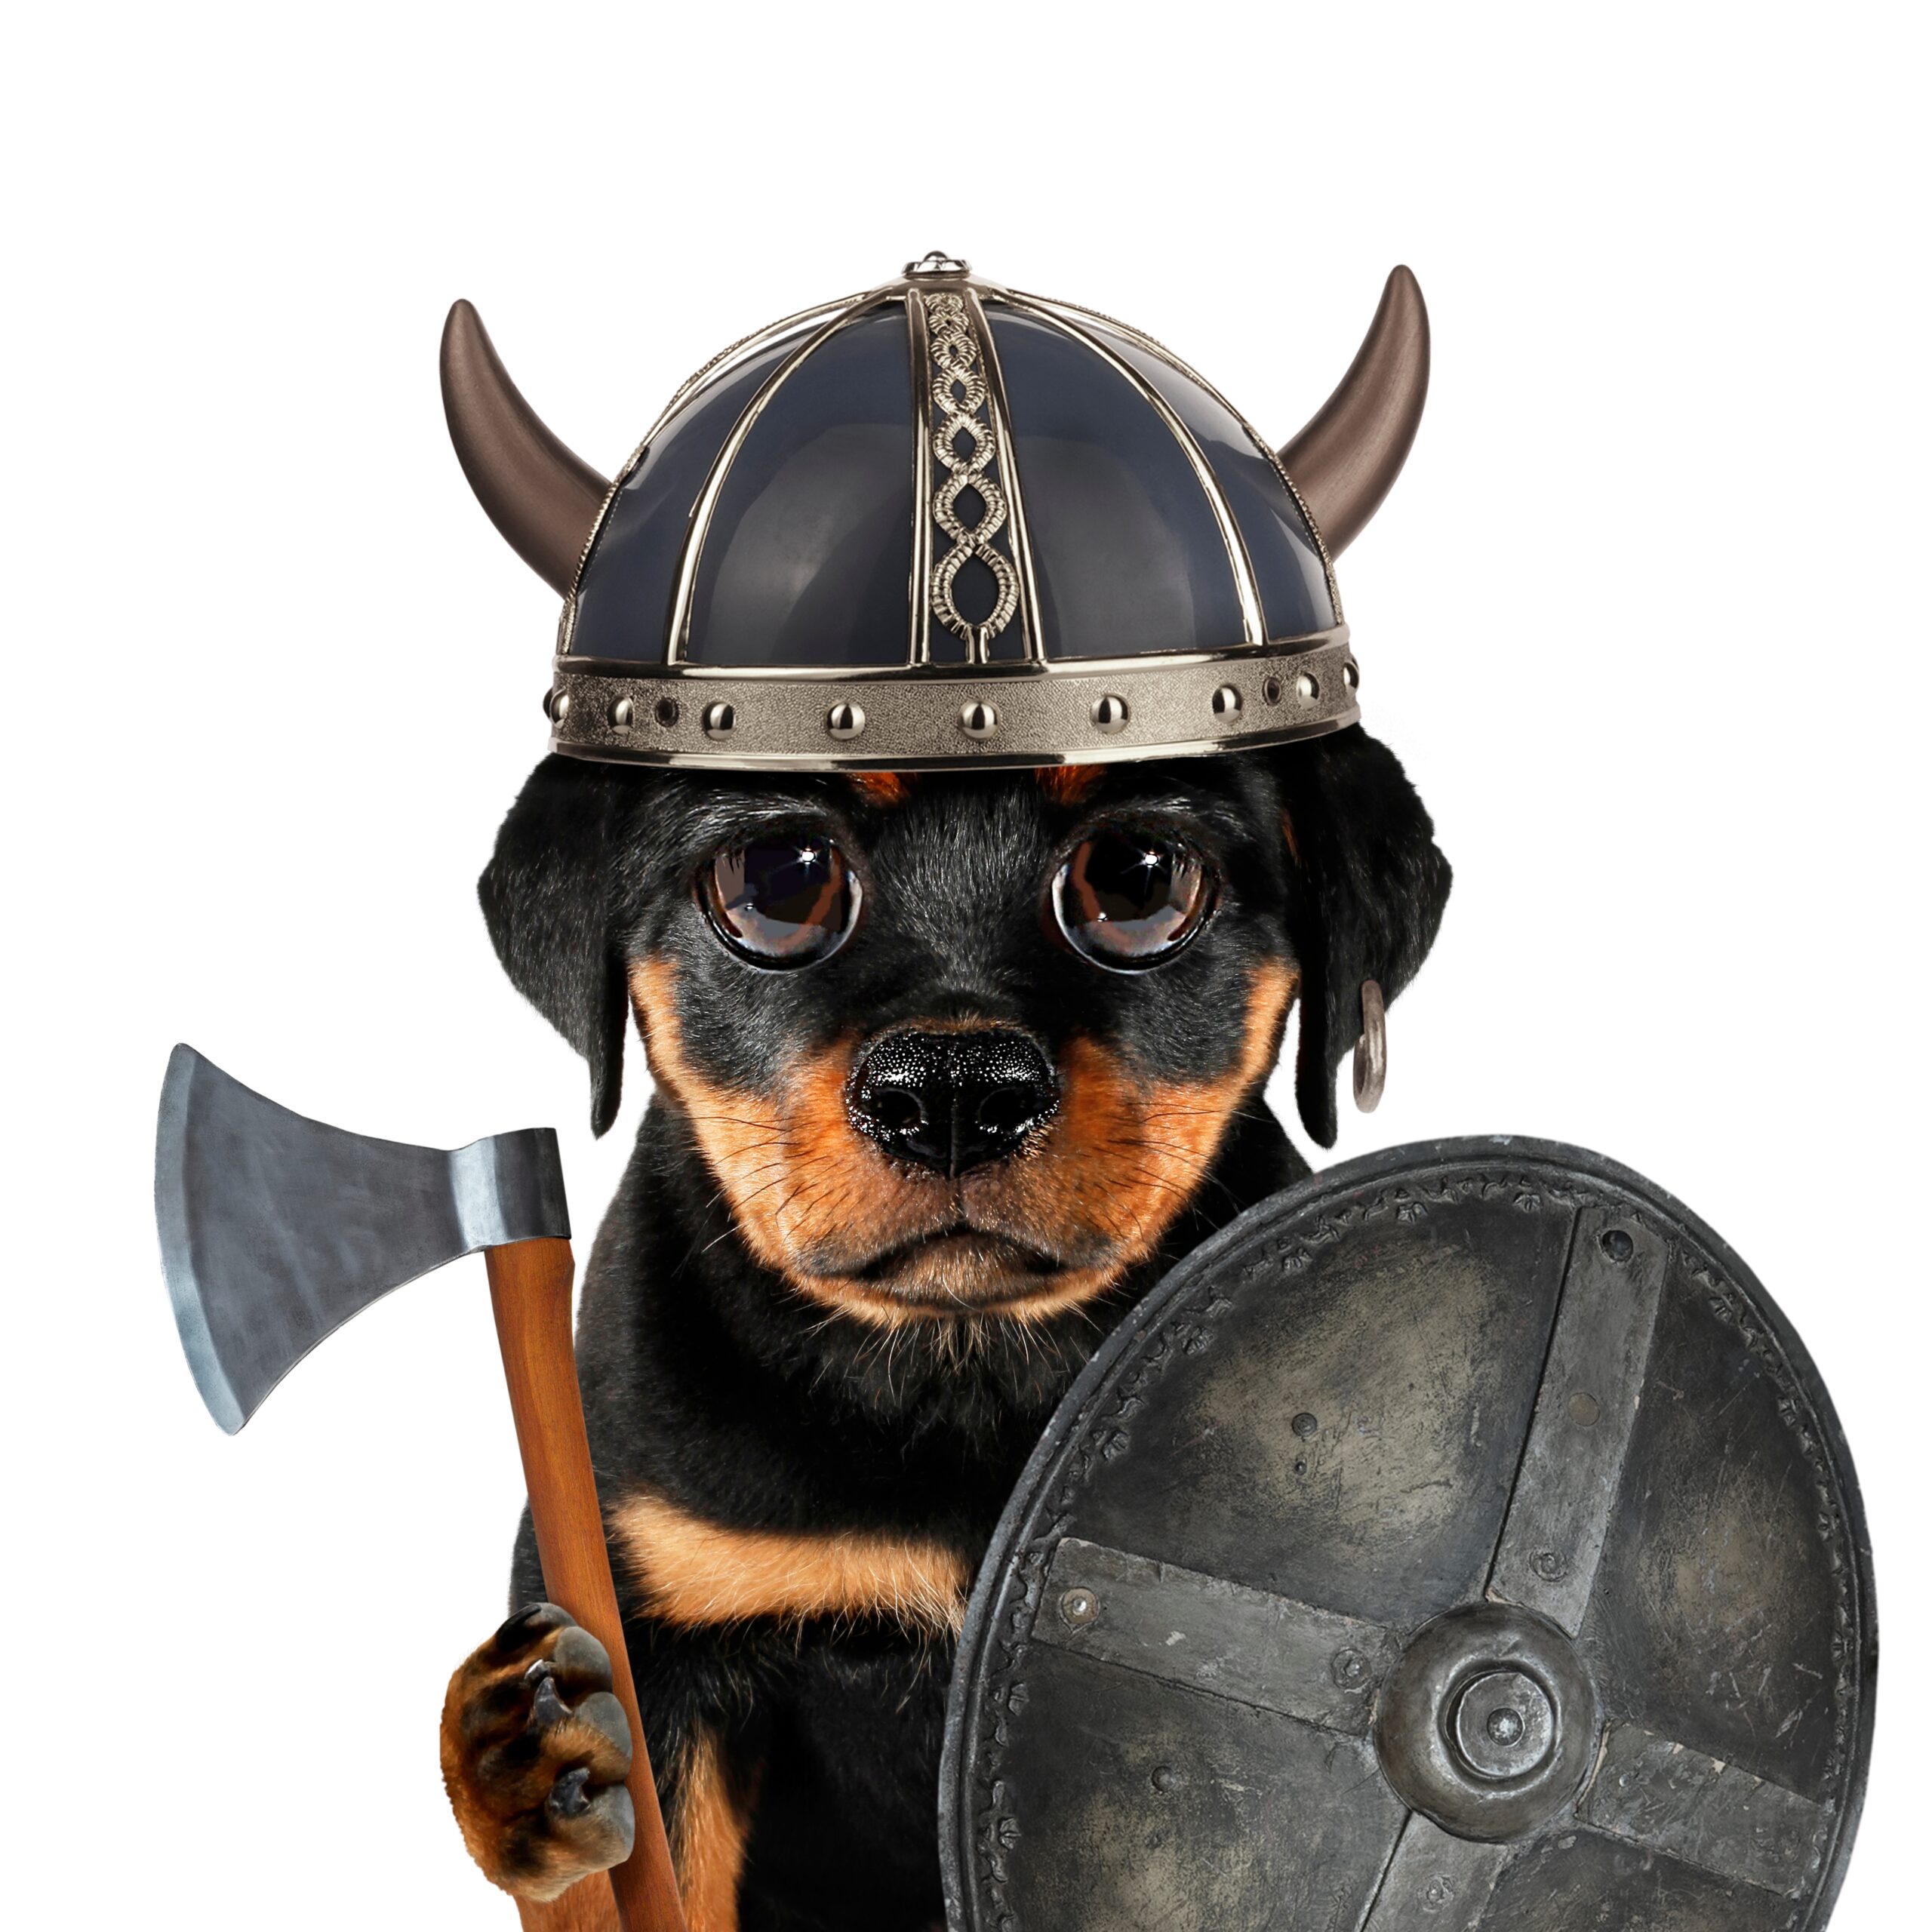 A small dog dressed as a Viking warrior